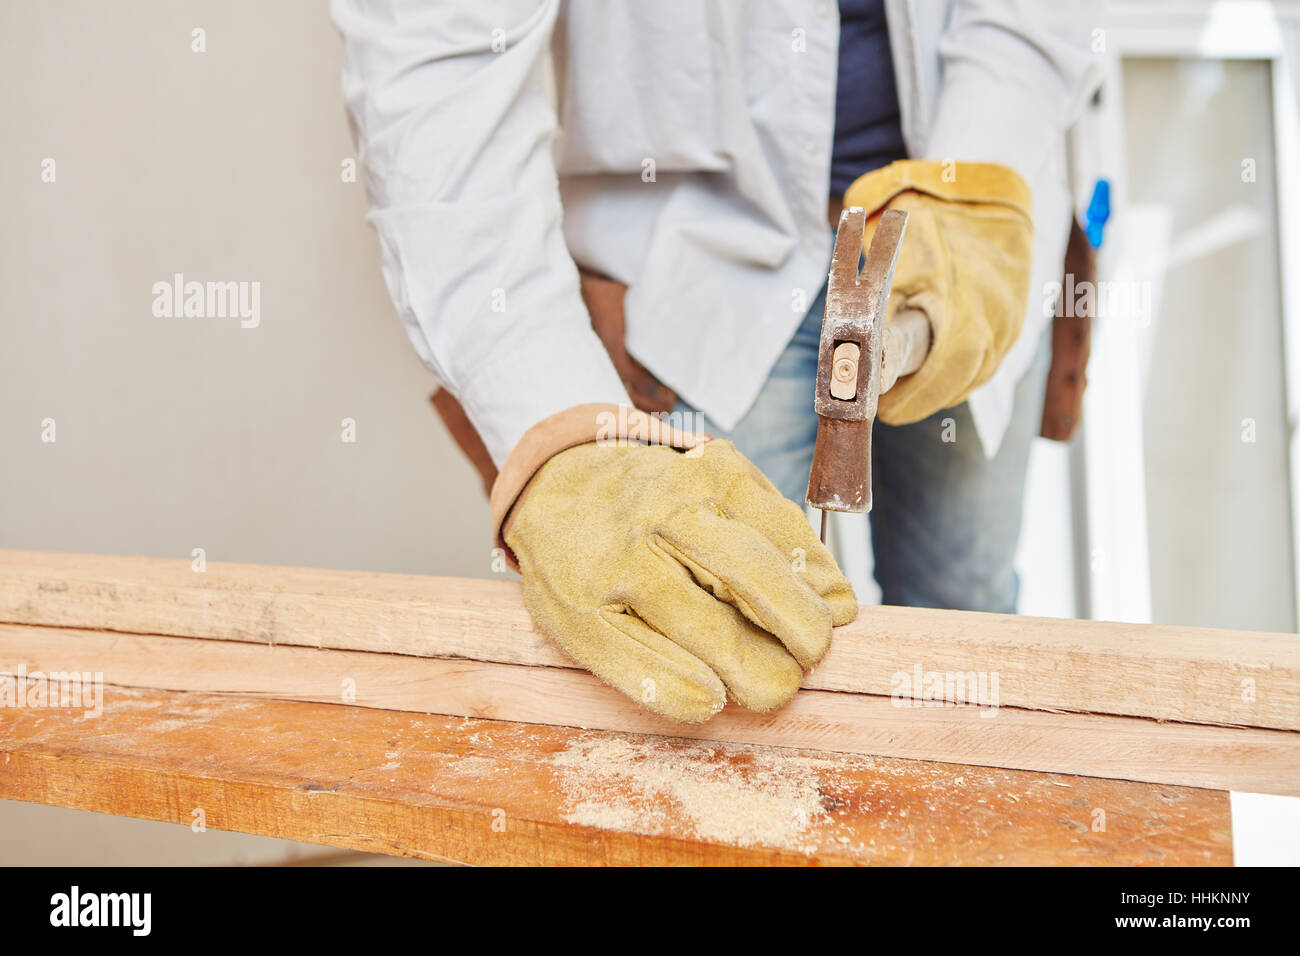 Carpenter hammering on wood during construction Stock Photo